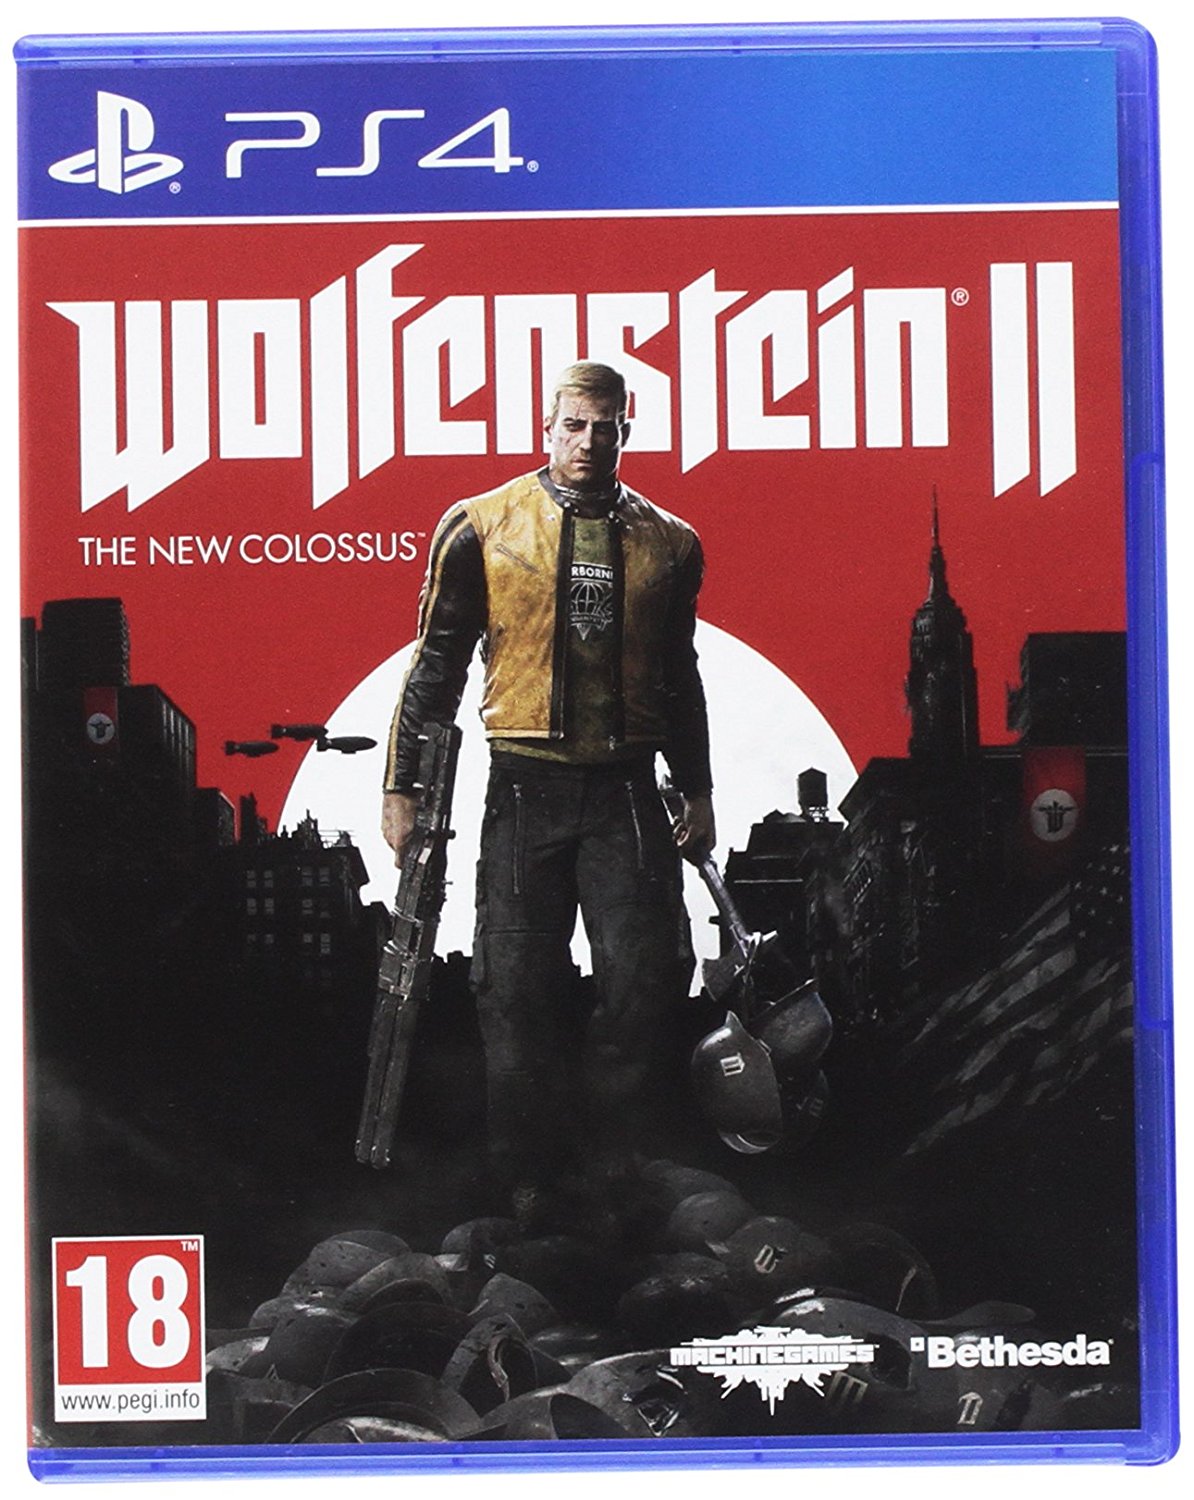 Wolfenstein II The New Colossus PS4 solo 9,9€